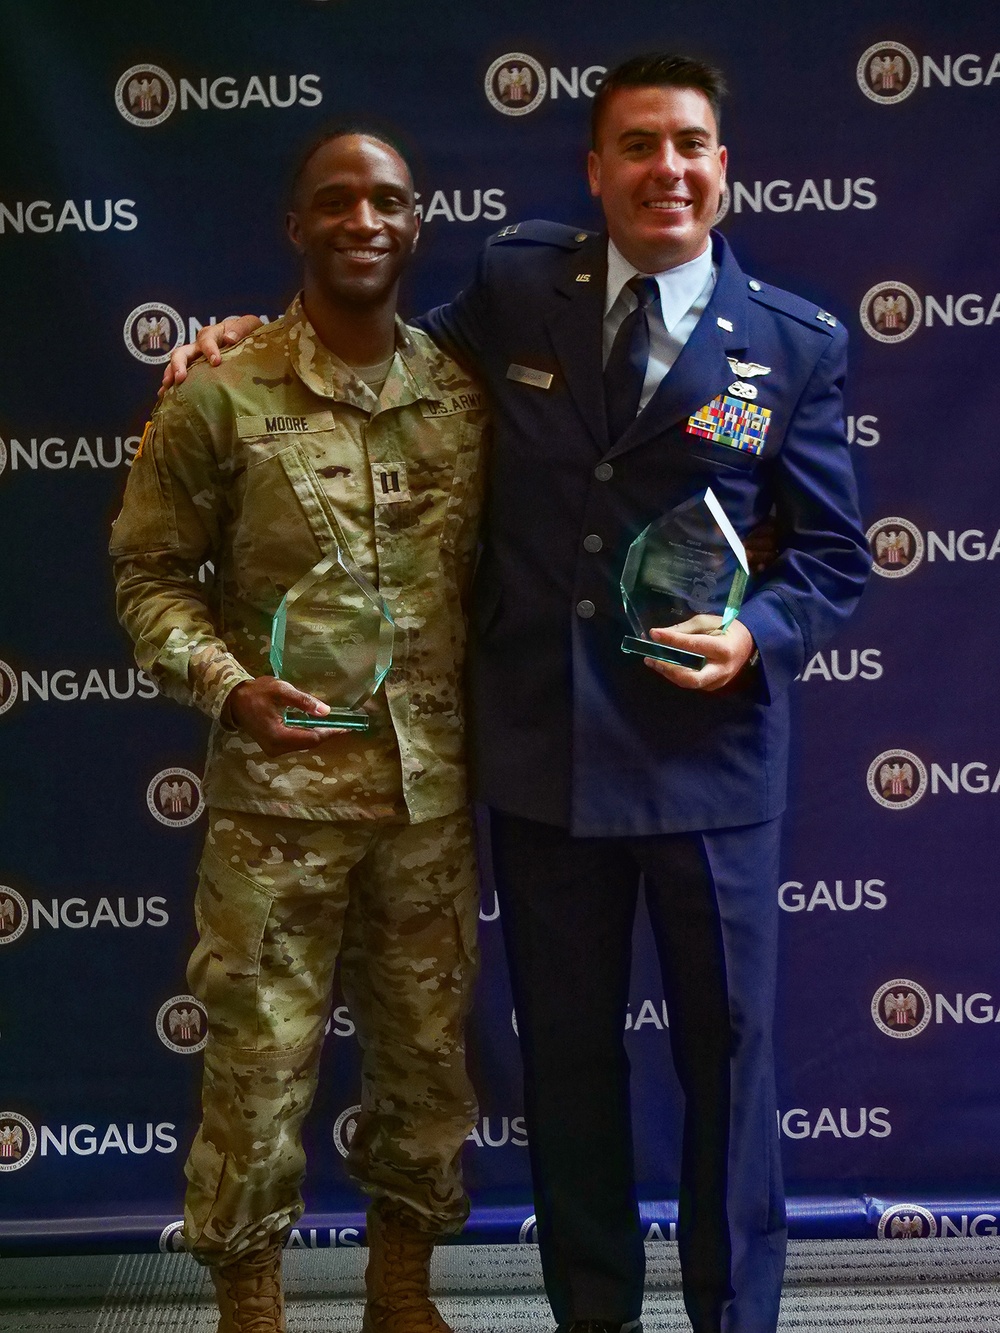 3 Ohio National Guard members among honorees during 2022 NGAUS Conference